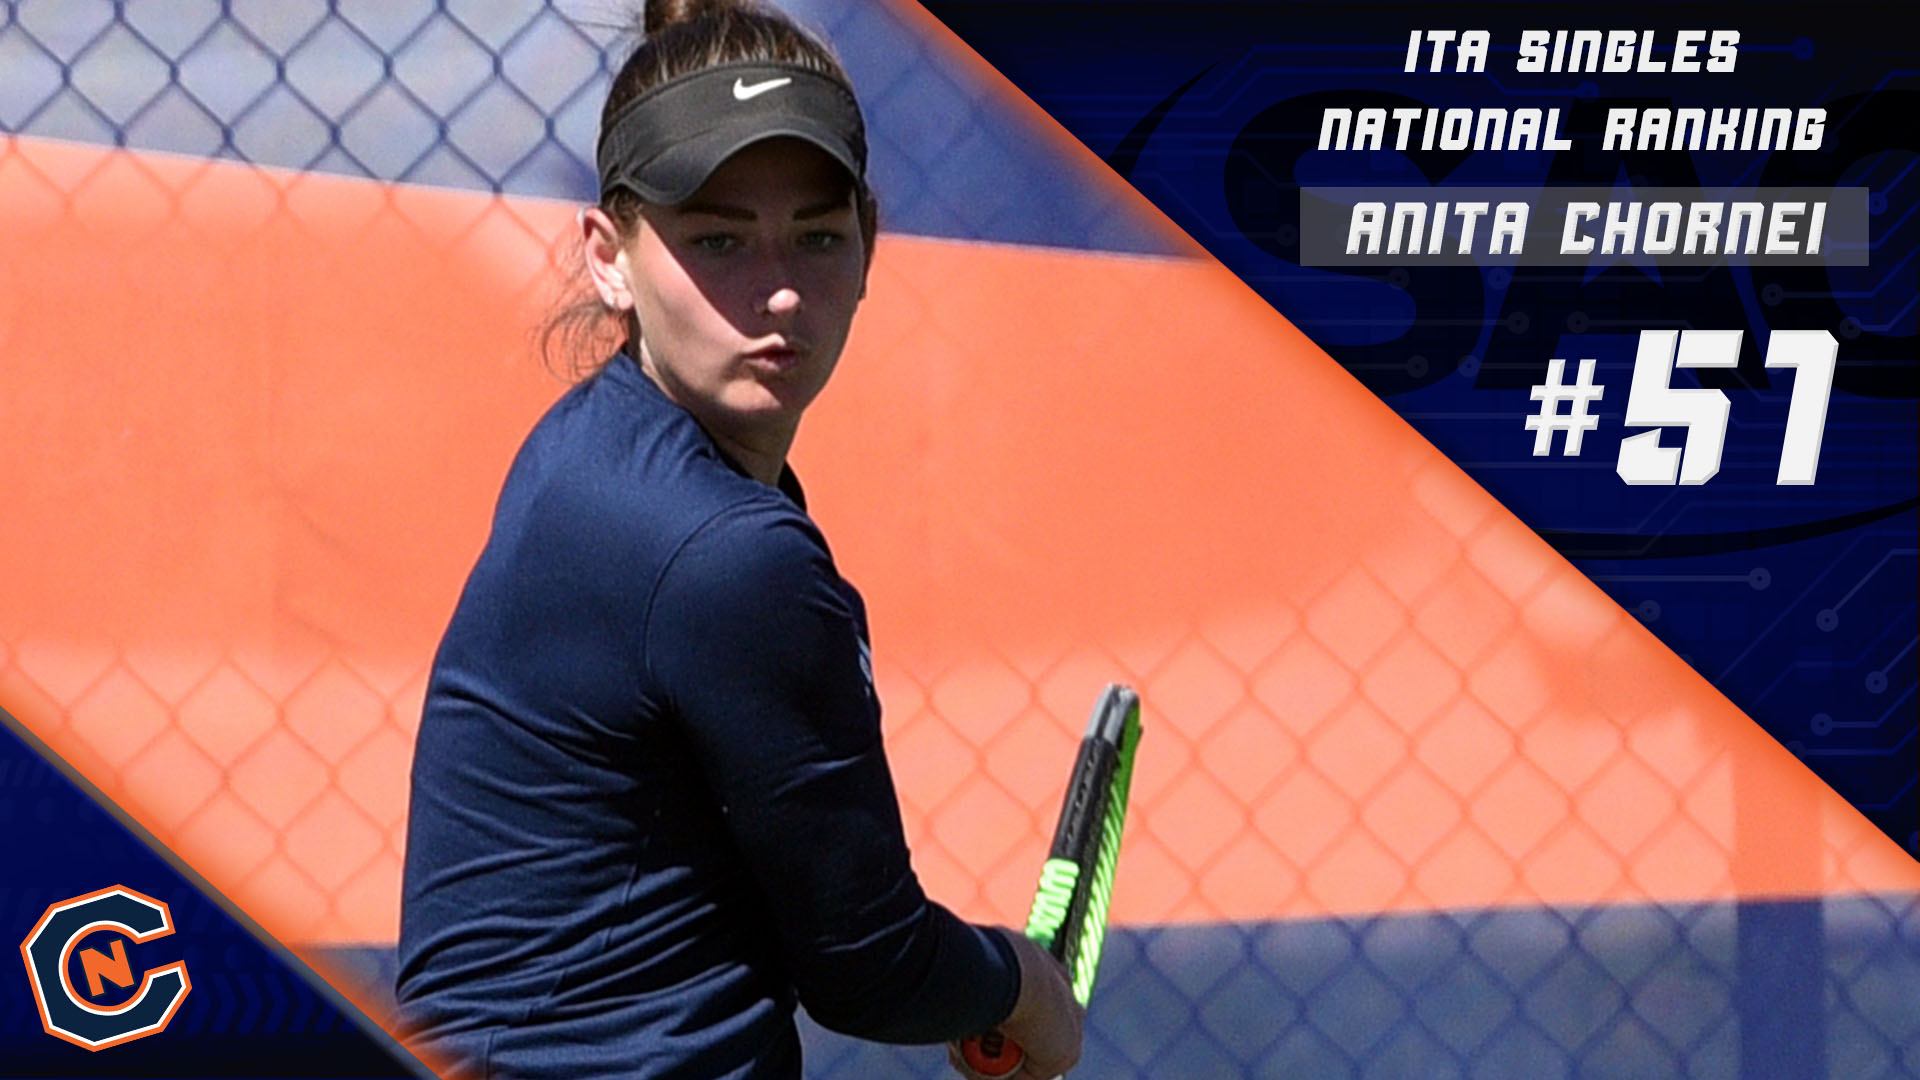 A Trio of Eagles Earn a Spot on the ITA's National Ranking